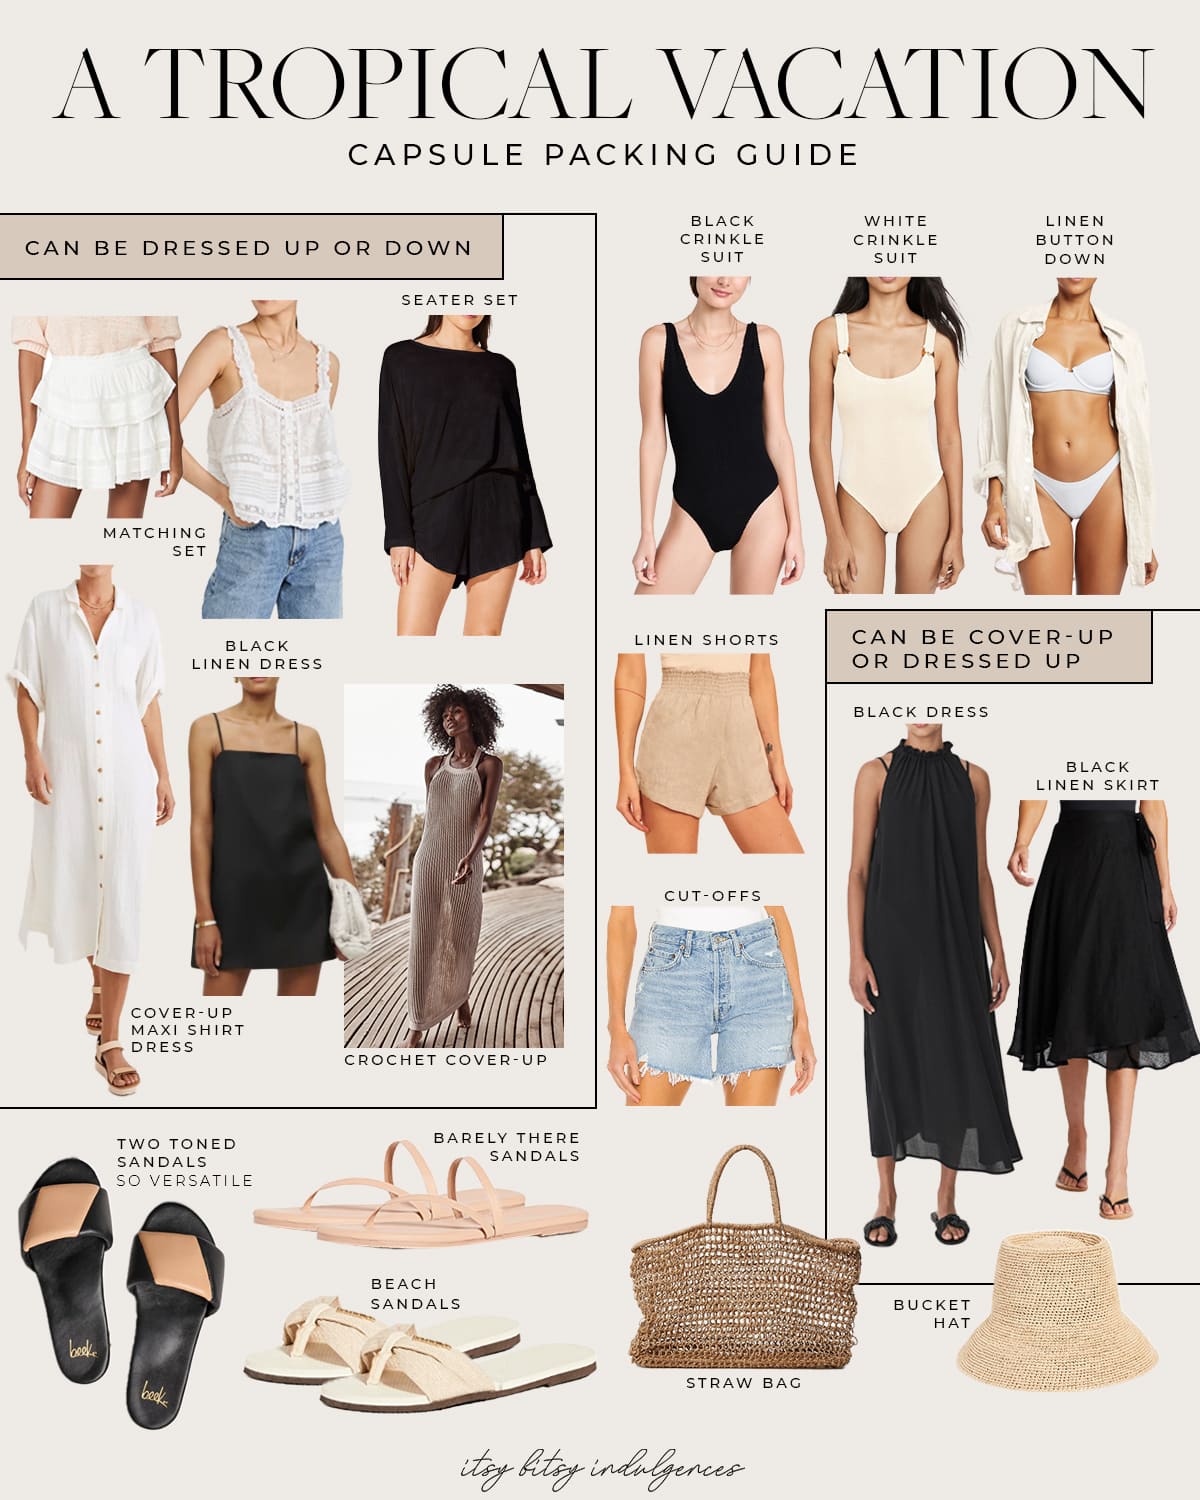 14 Items That Make Up an Elevated Travel Capsule Wardrobe